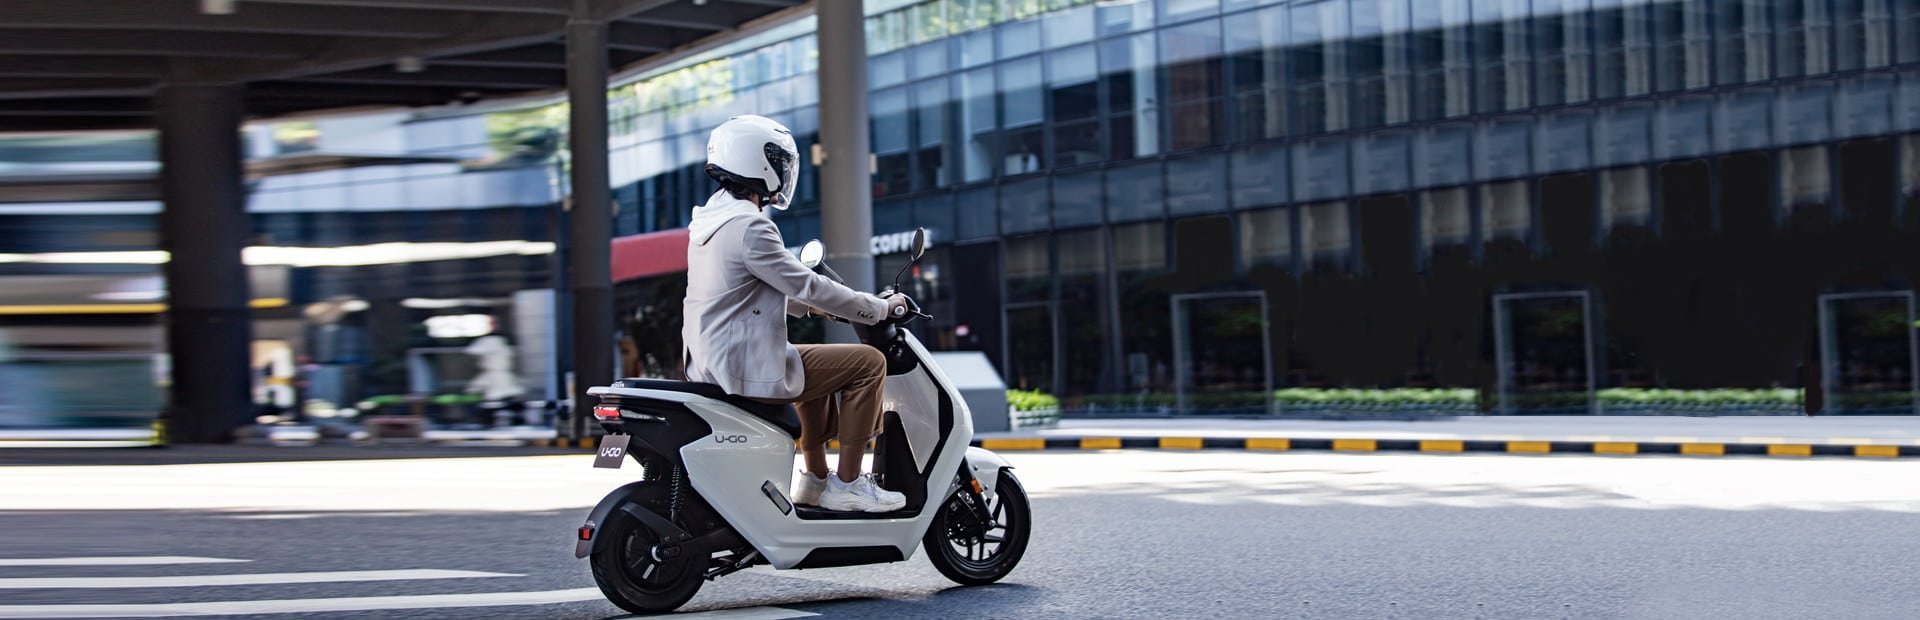 honda-rolls-out-super-affordable-u-go-electric-scooter-made-for-urban-riding-166841_1